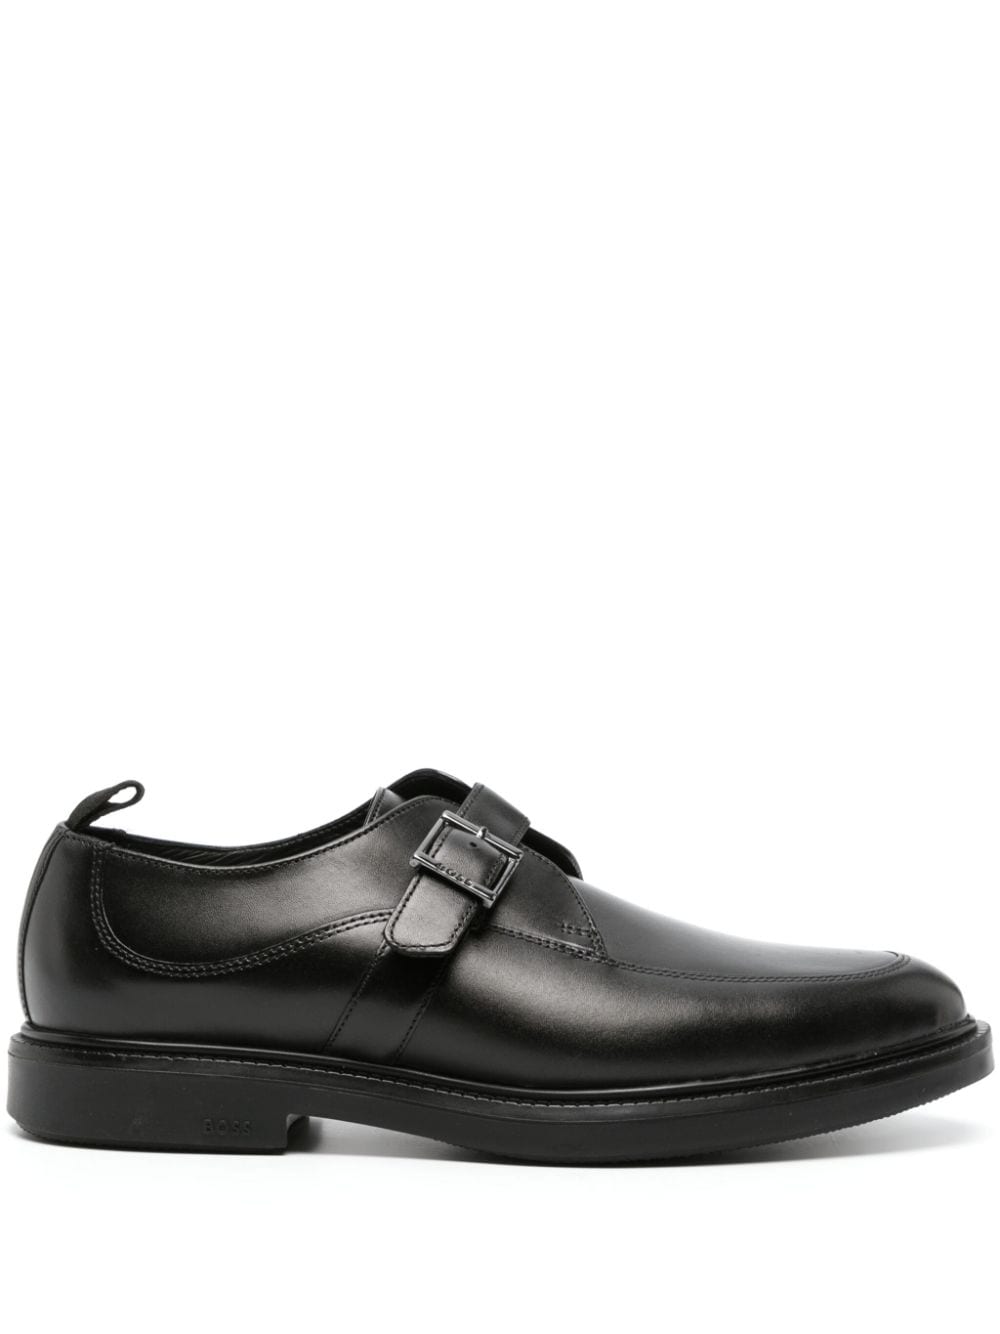 Image 1 of BOSS Larry leather Oxford shoes